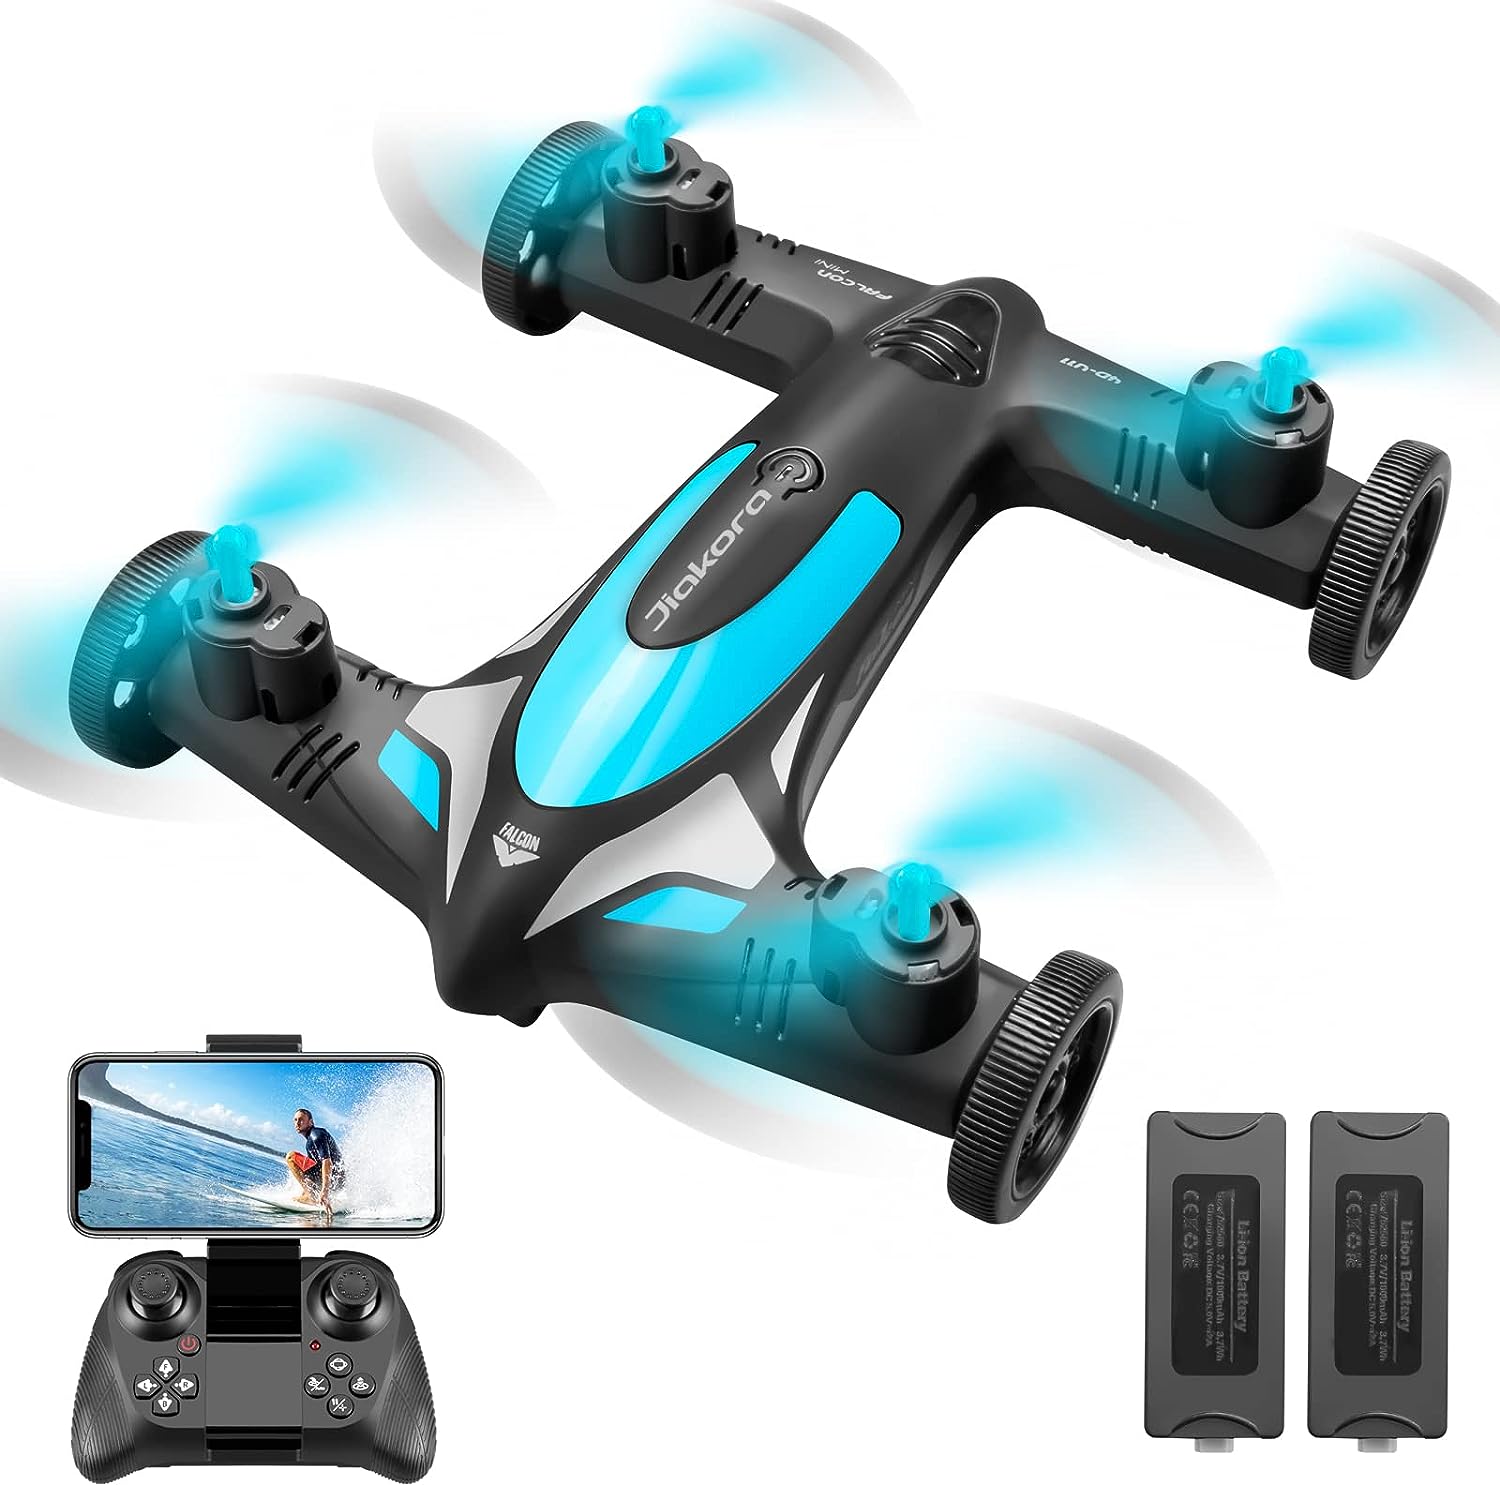 Jiakora V11 Mini Drone with Camera for Kids, Drone for kids 8-12, 1080P HD FPV Remote Control Quadcopter Drone for beginners with Land Mode or Fly Mode, 2 Batteries, App Control, Altitude Hold, Headless Mode, 3D Flips, Gift Toy for Boys Girls